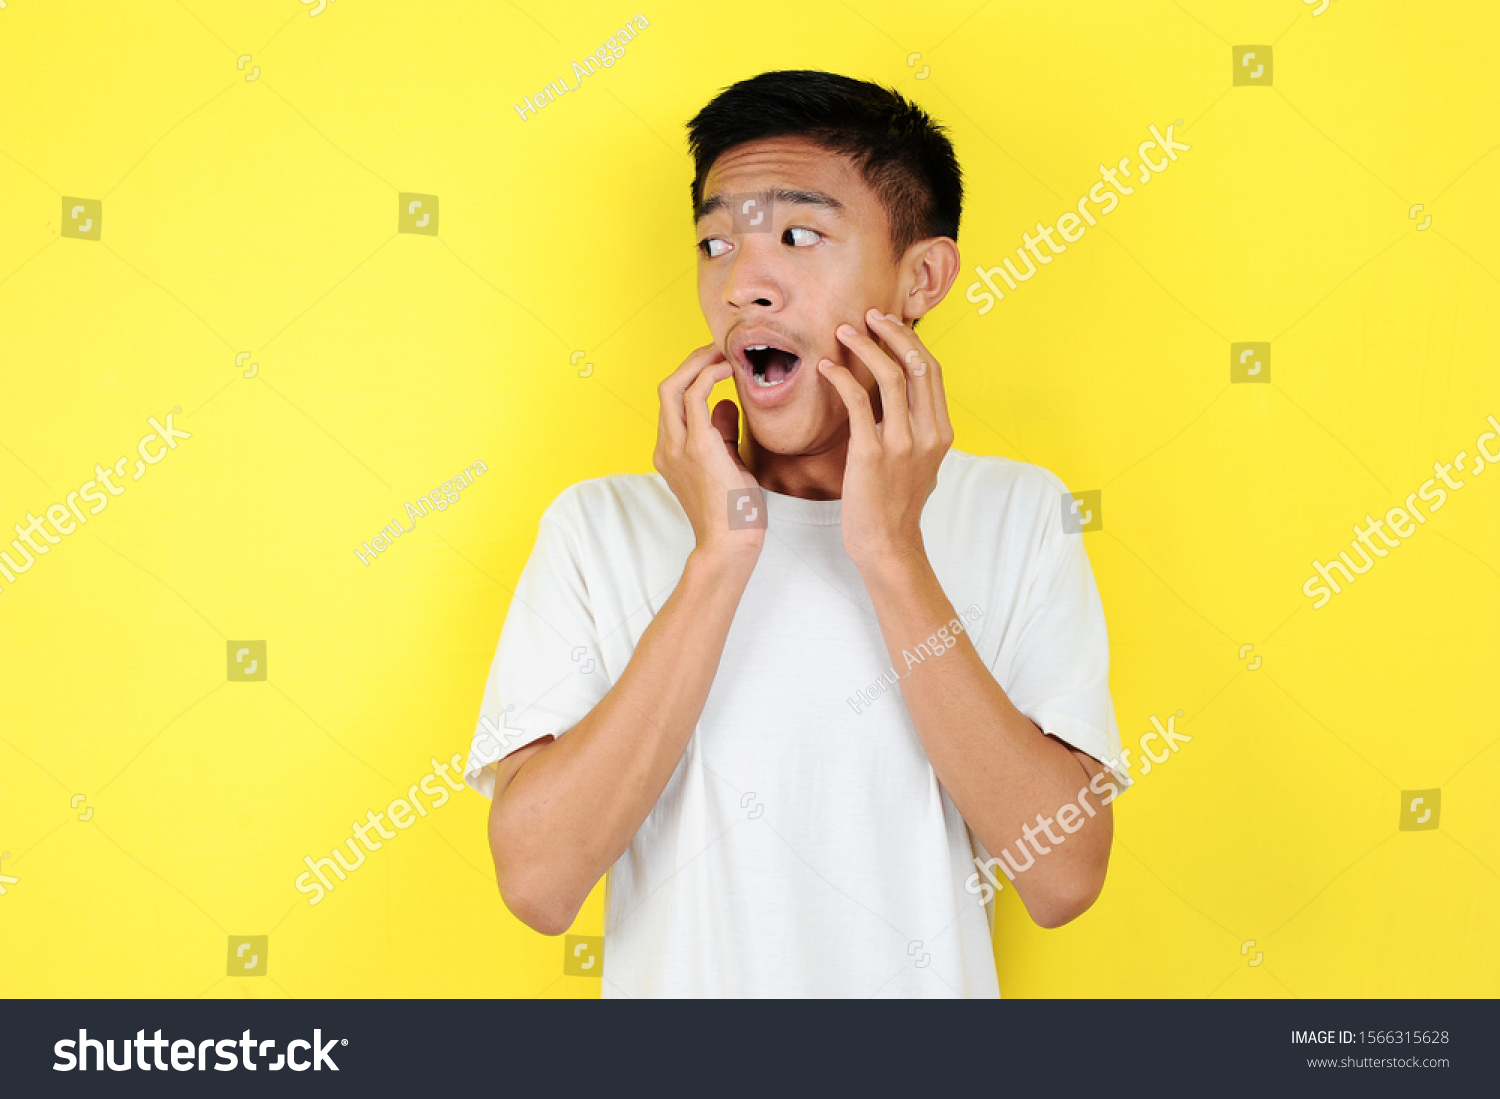 Shocked face of Asian man in white shirt on yellow background. #1566315628